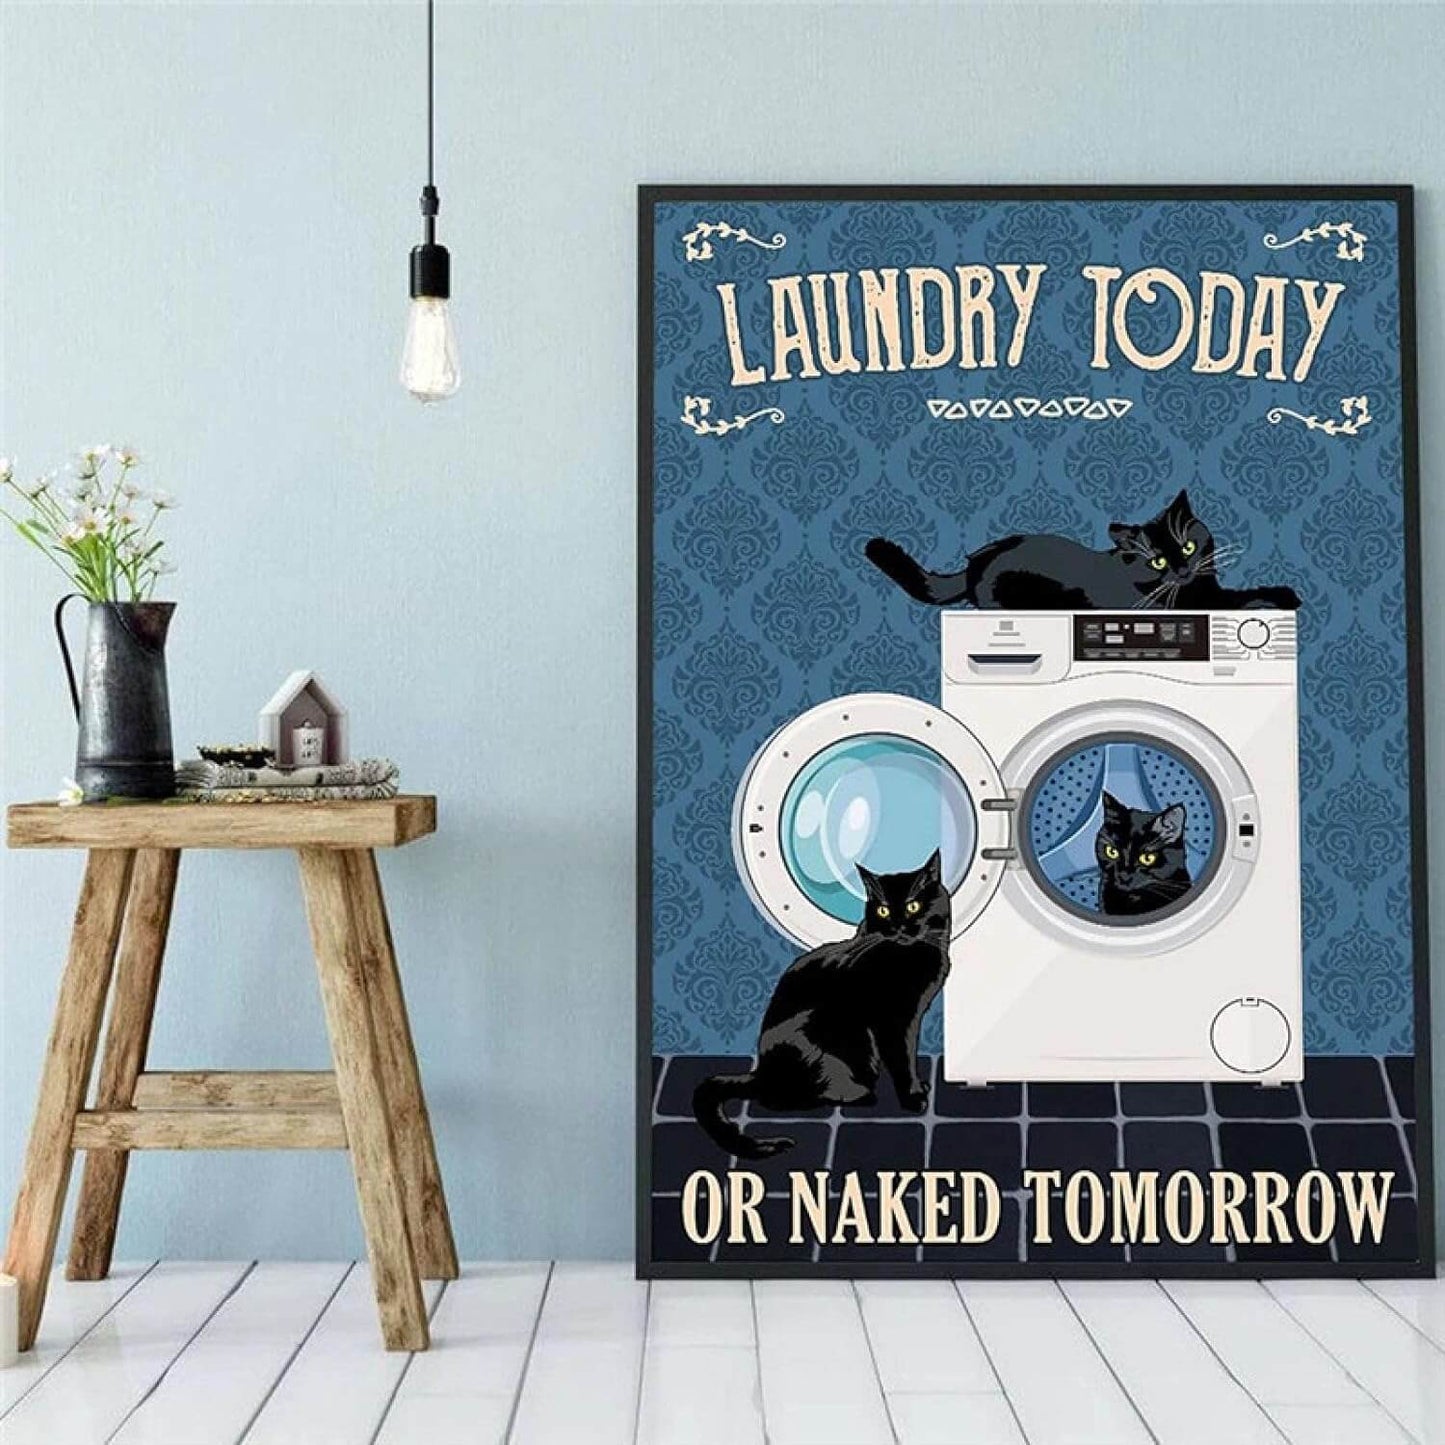 Black Cat Vintage Laundry Canvas Print | Laundry Today Or Naked Tomorrow Poster Funny Inspirational Quotes Wall Art Animals Pictures For Bathroom Fine Art Home Décor